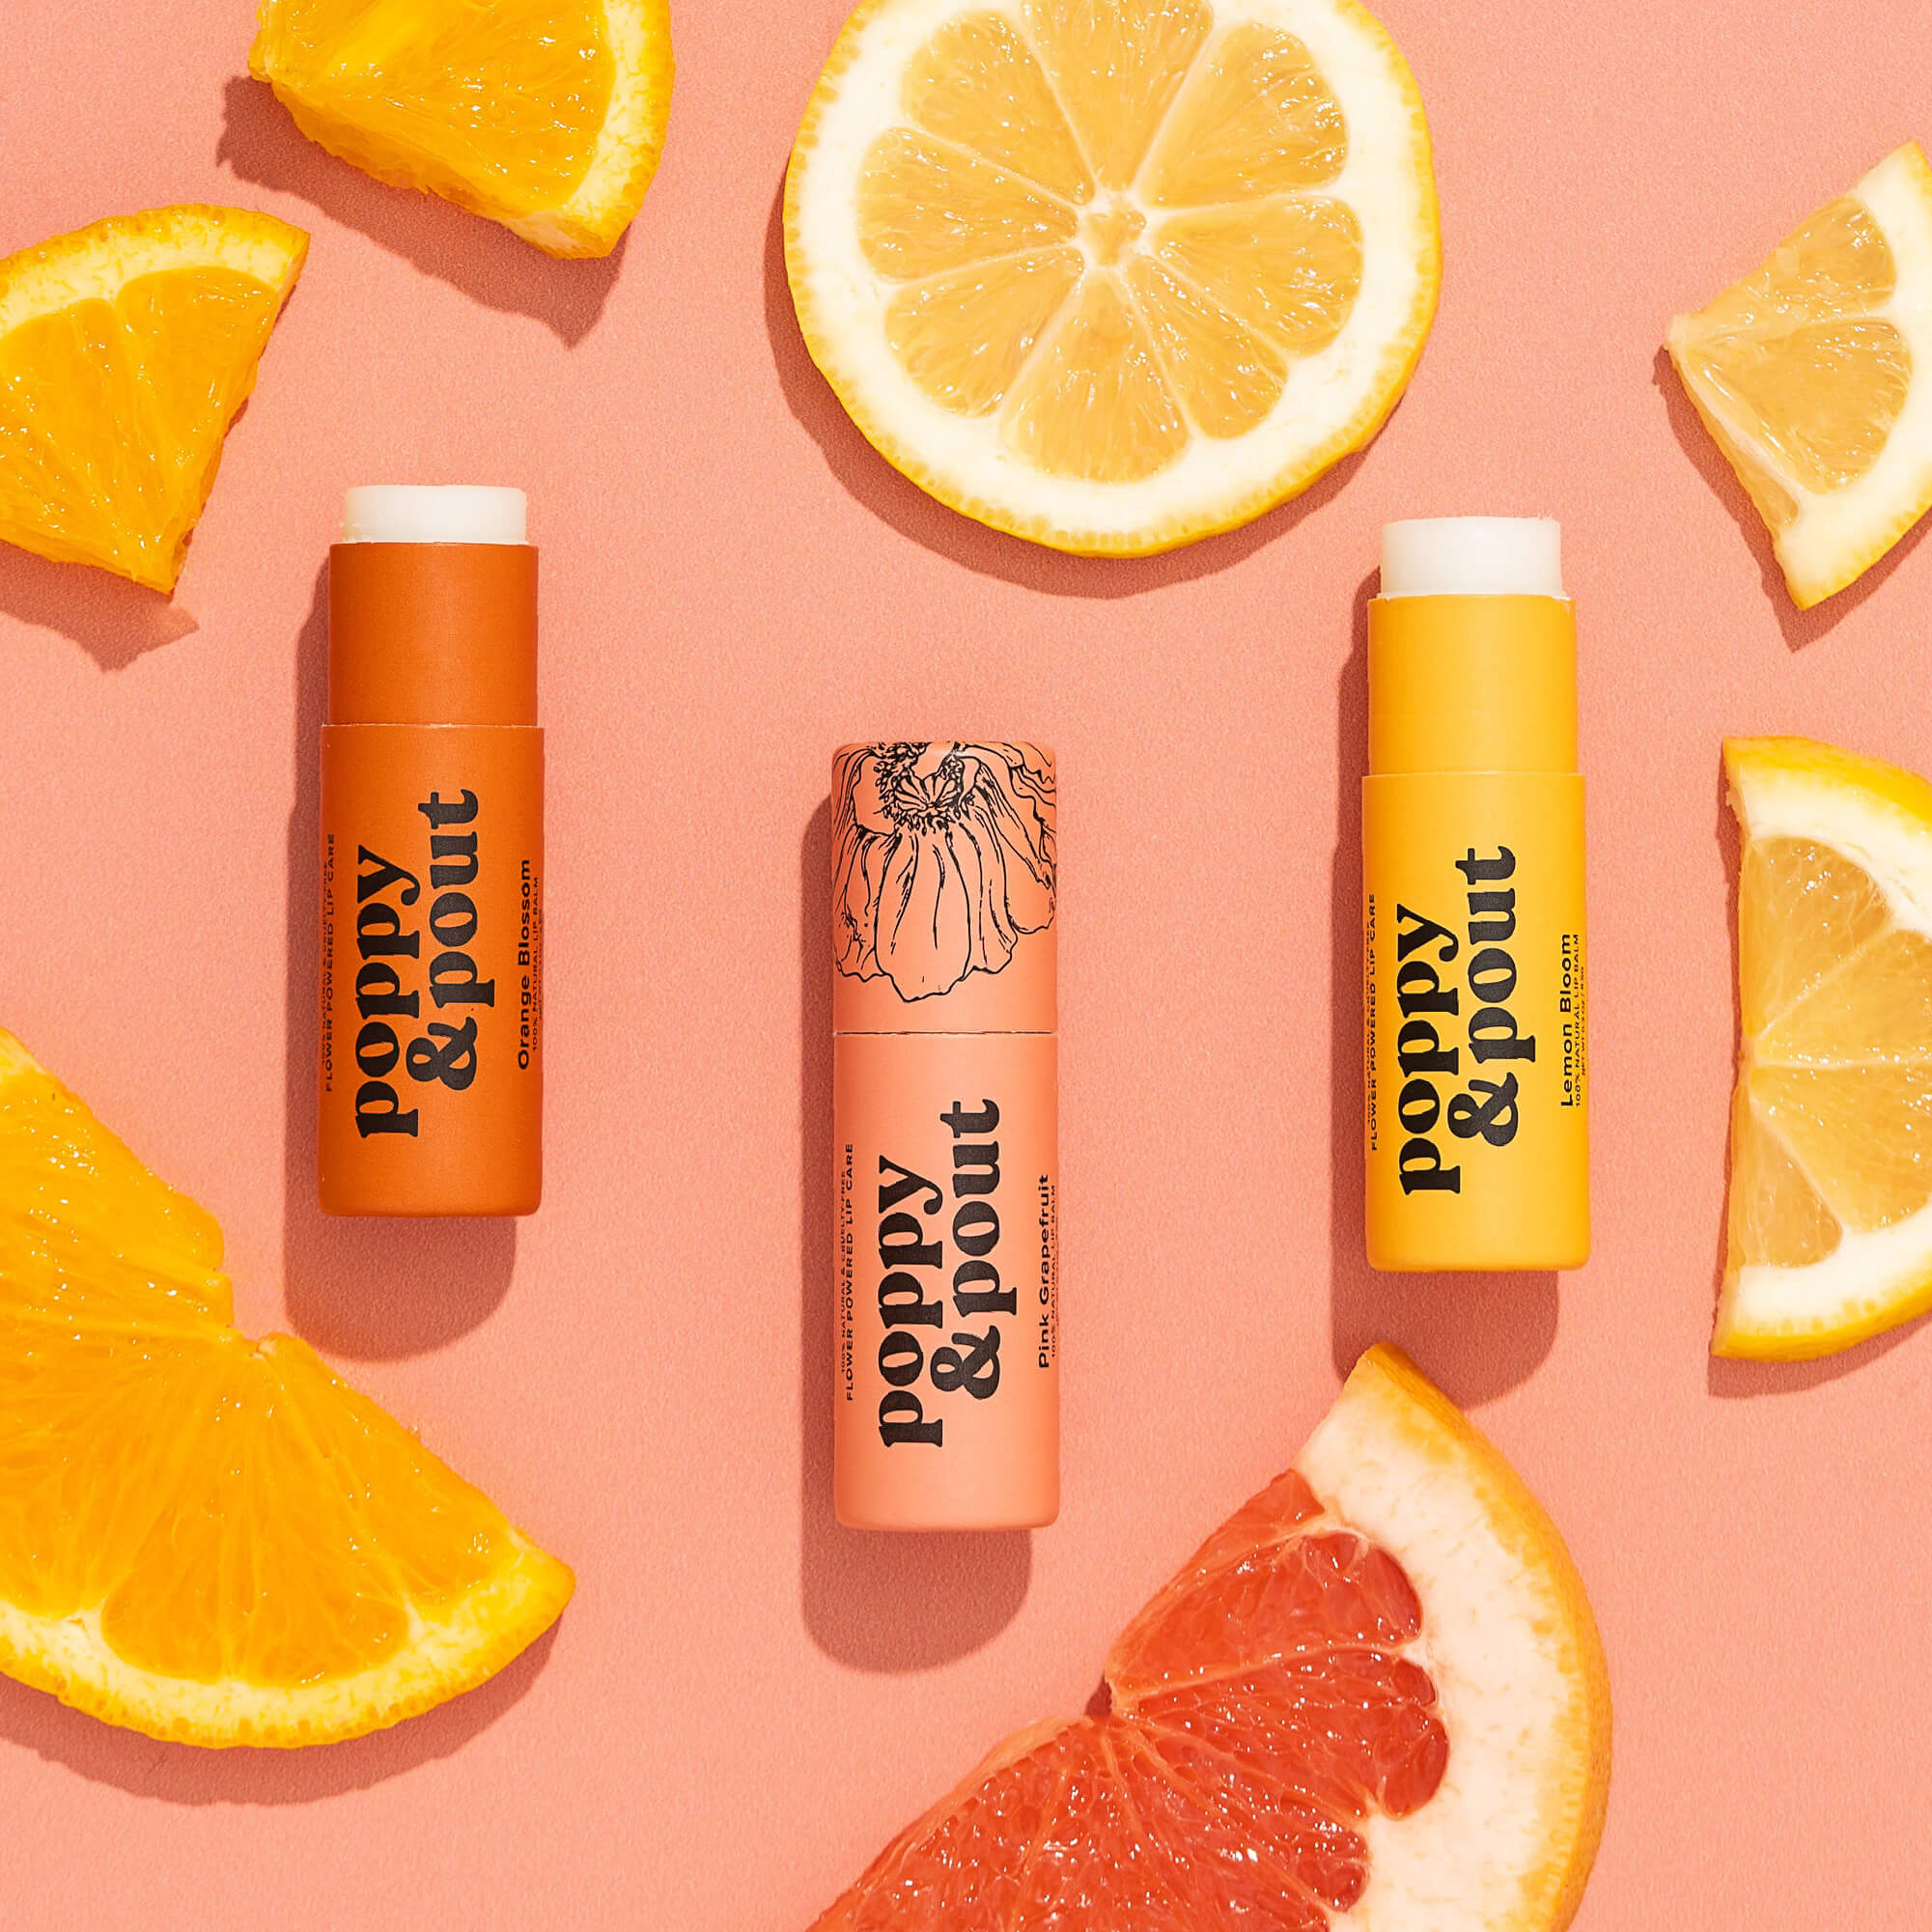 Gift Set, Lip Balm 3-Pack, Best of the Zest - Poppy & Pout